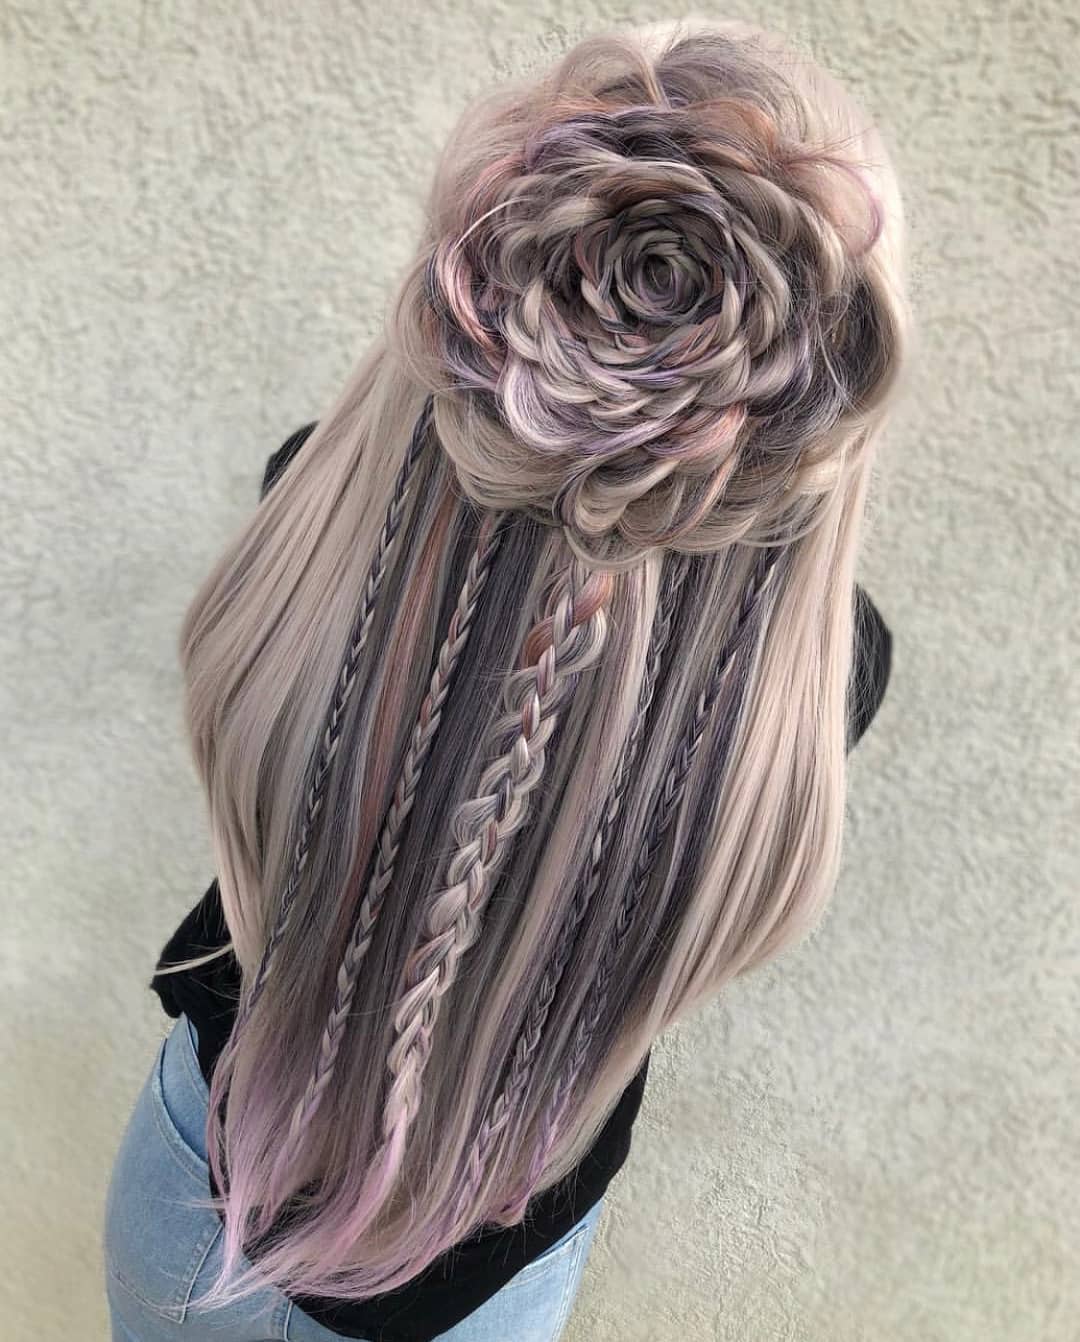 10 Amazing Braided Hairstyles For Long Hair 2021